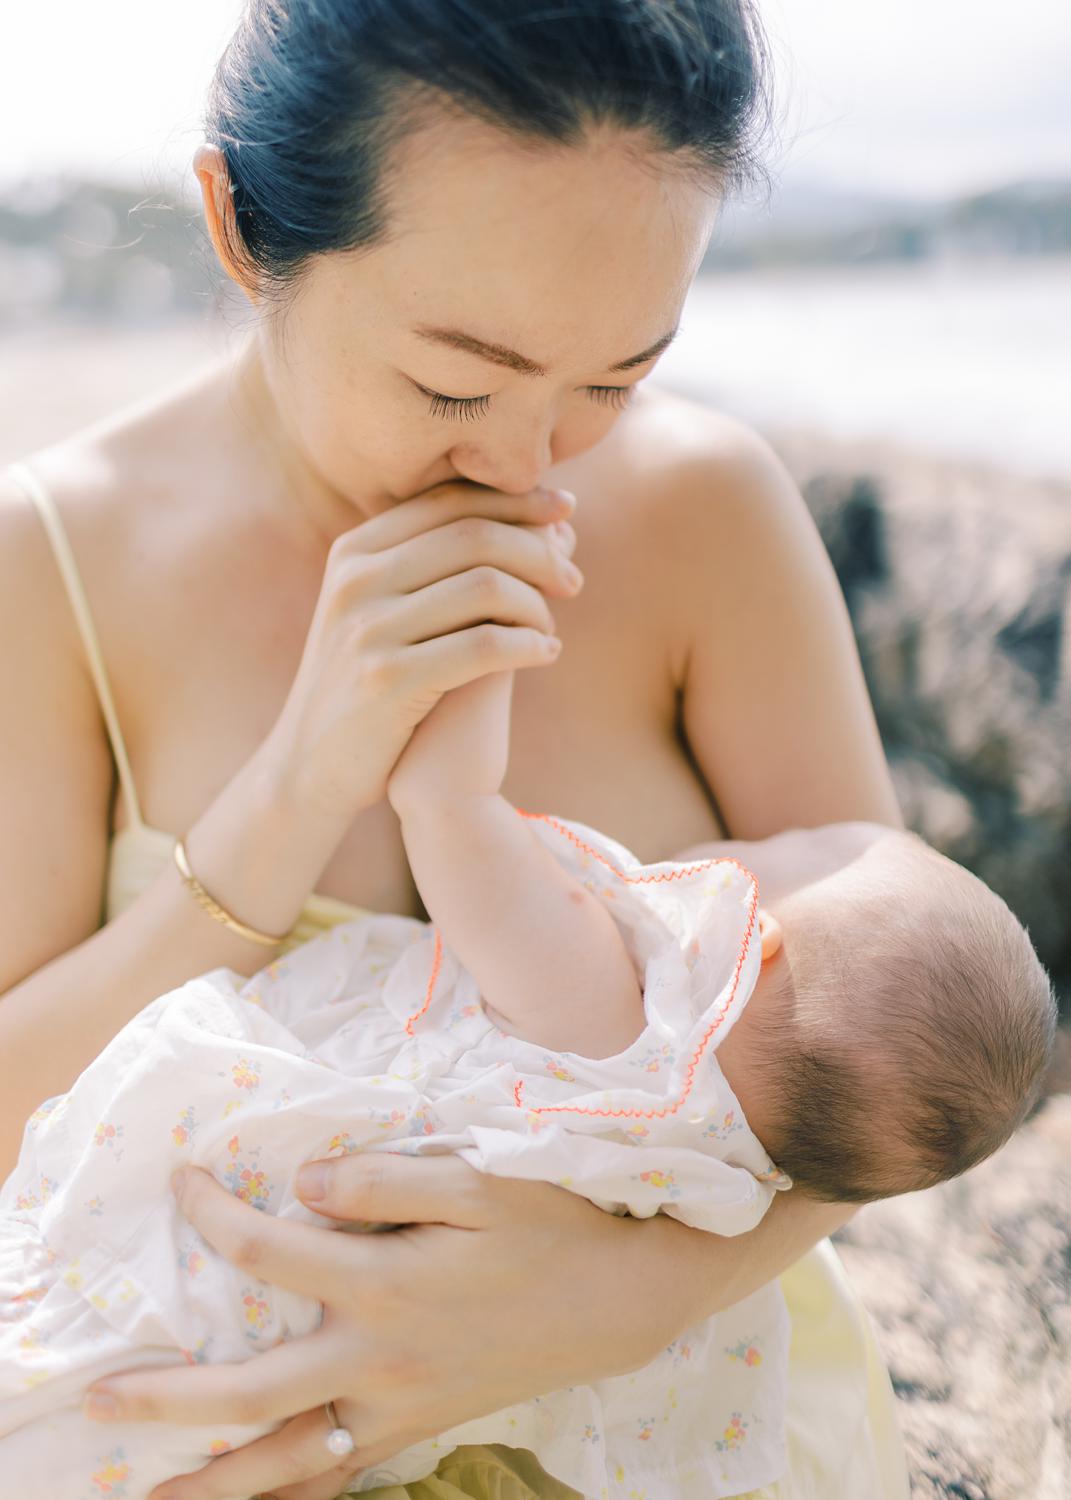 Mother is kissing baby's hand while she breastfeeds her baby girl during their nursing photoshoot.
